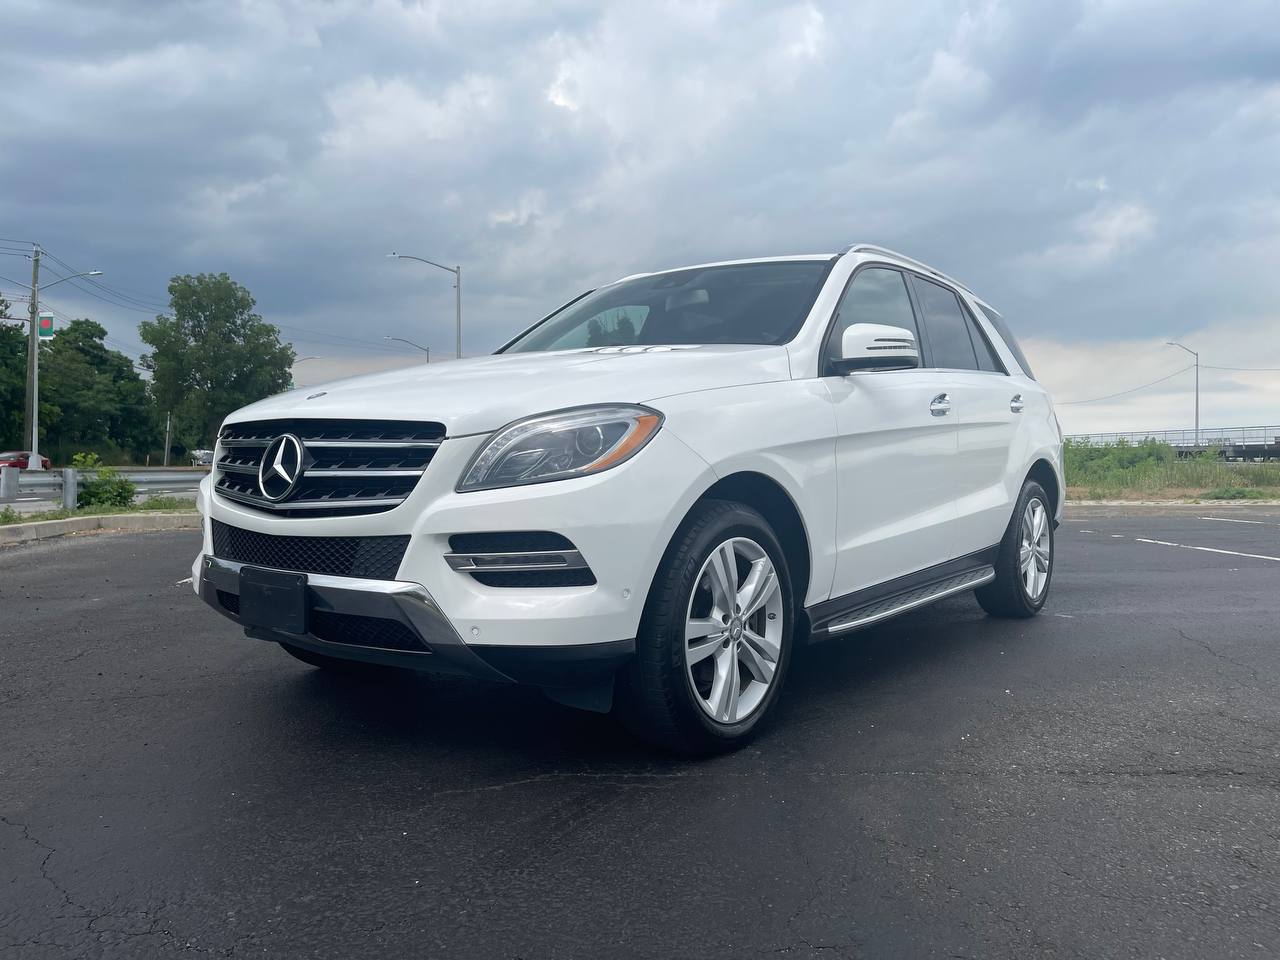 Used Car - 2014 Mercedes-Benz ML 350 4MATIC AWD for Sale in Staten Island, NY